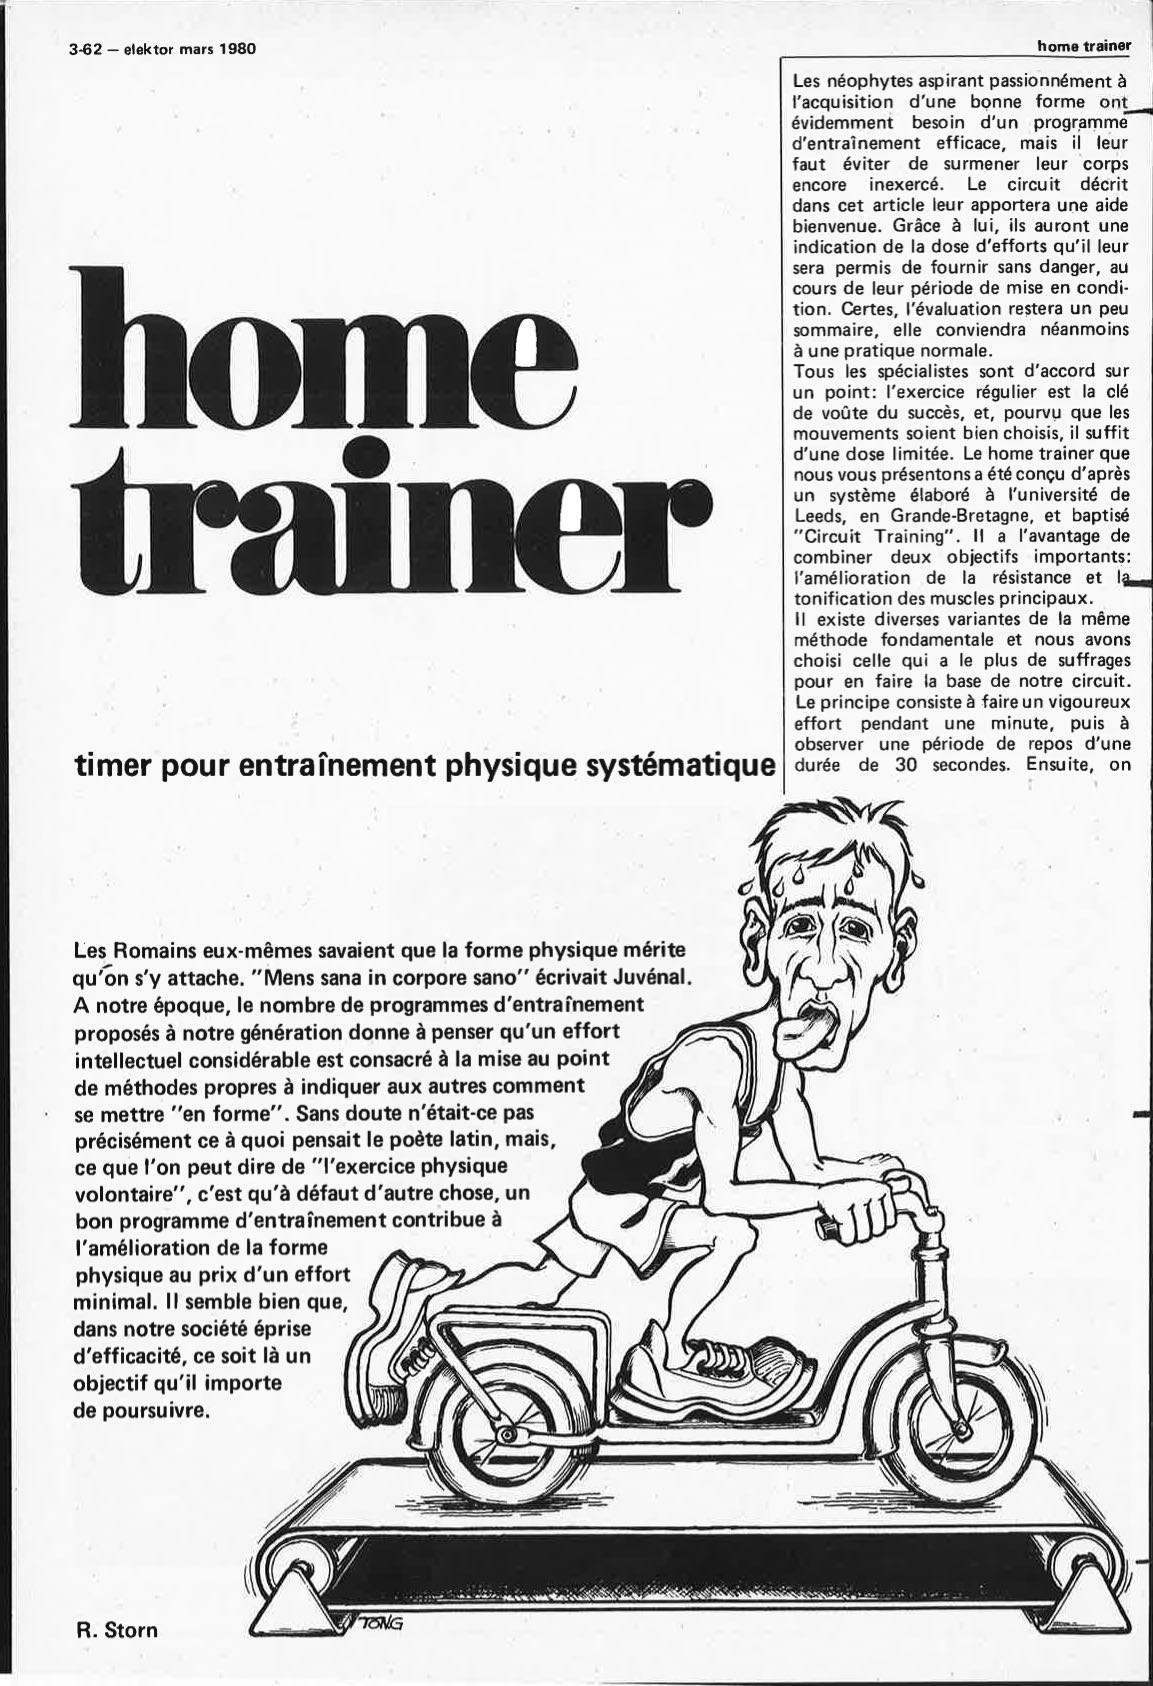 Home-trainer